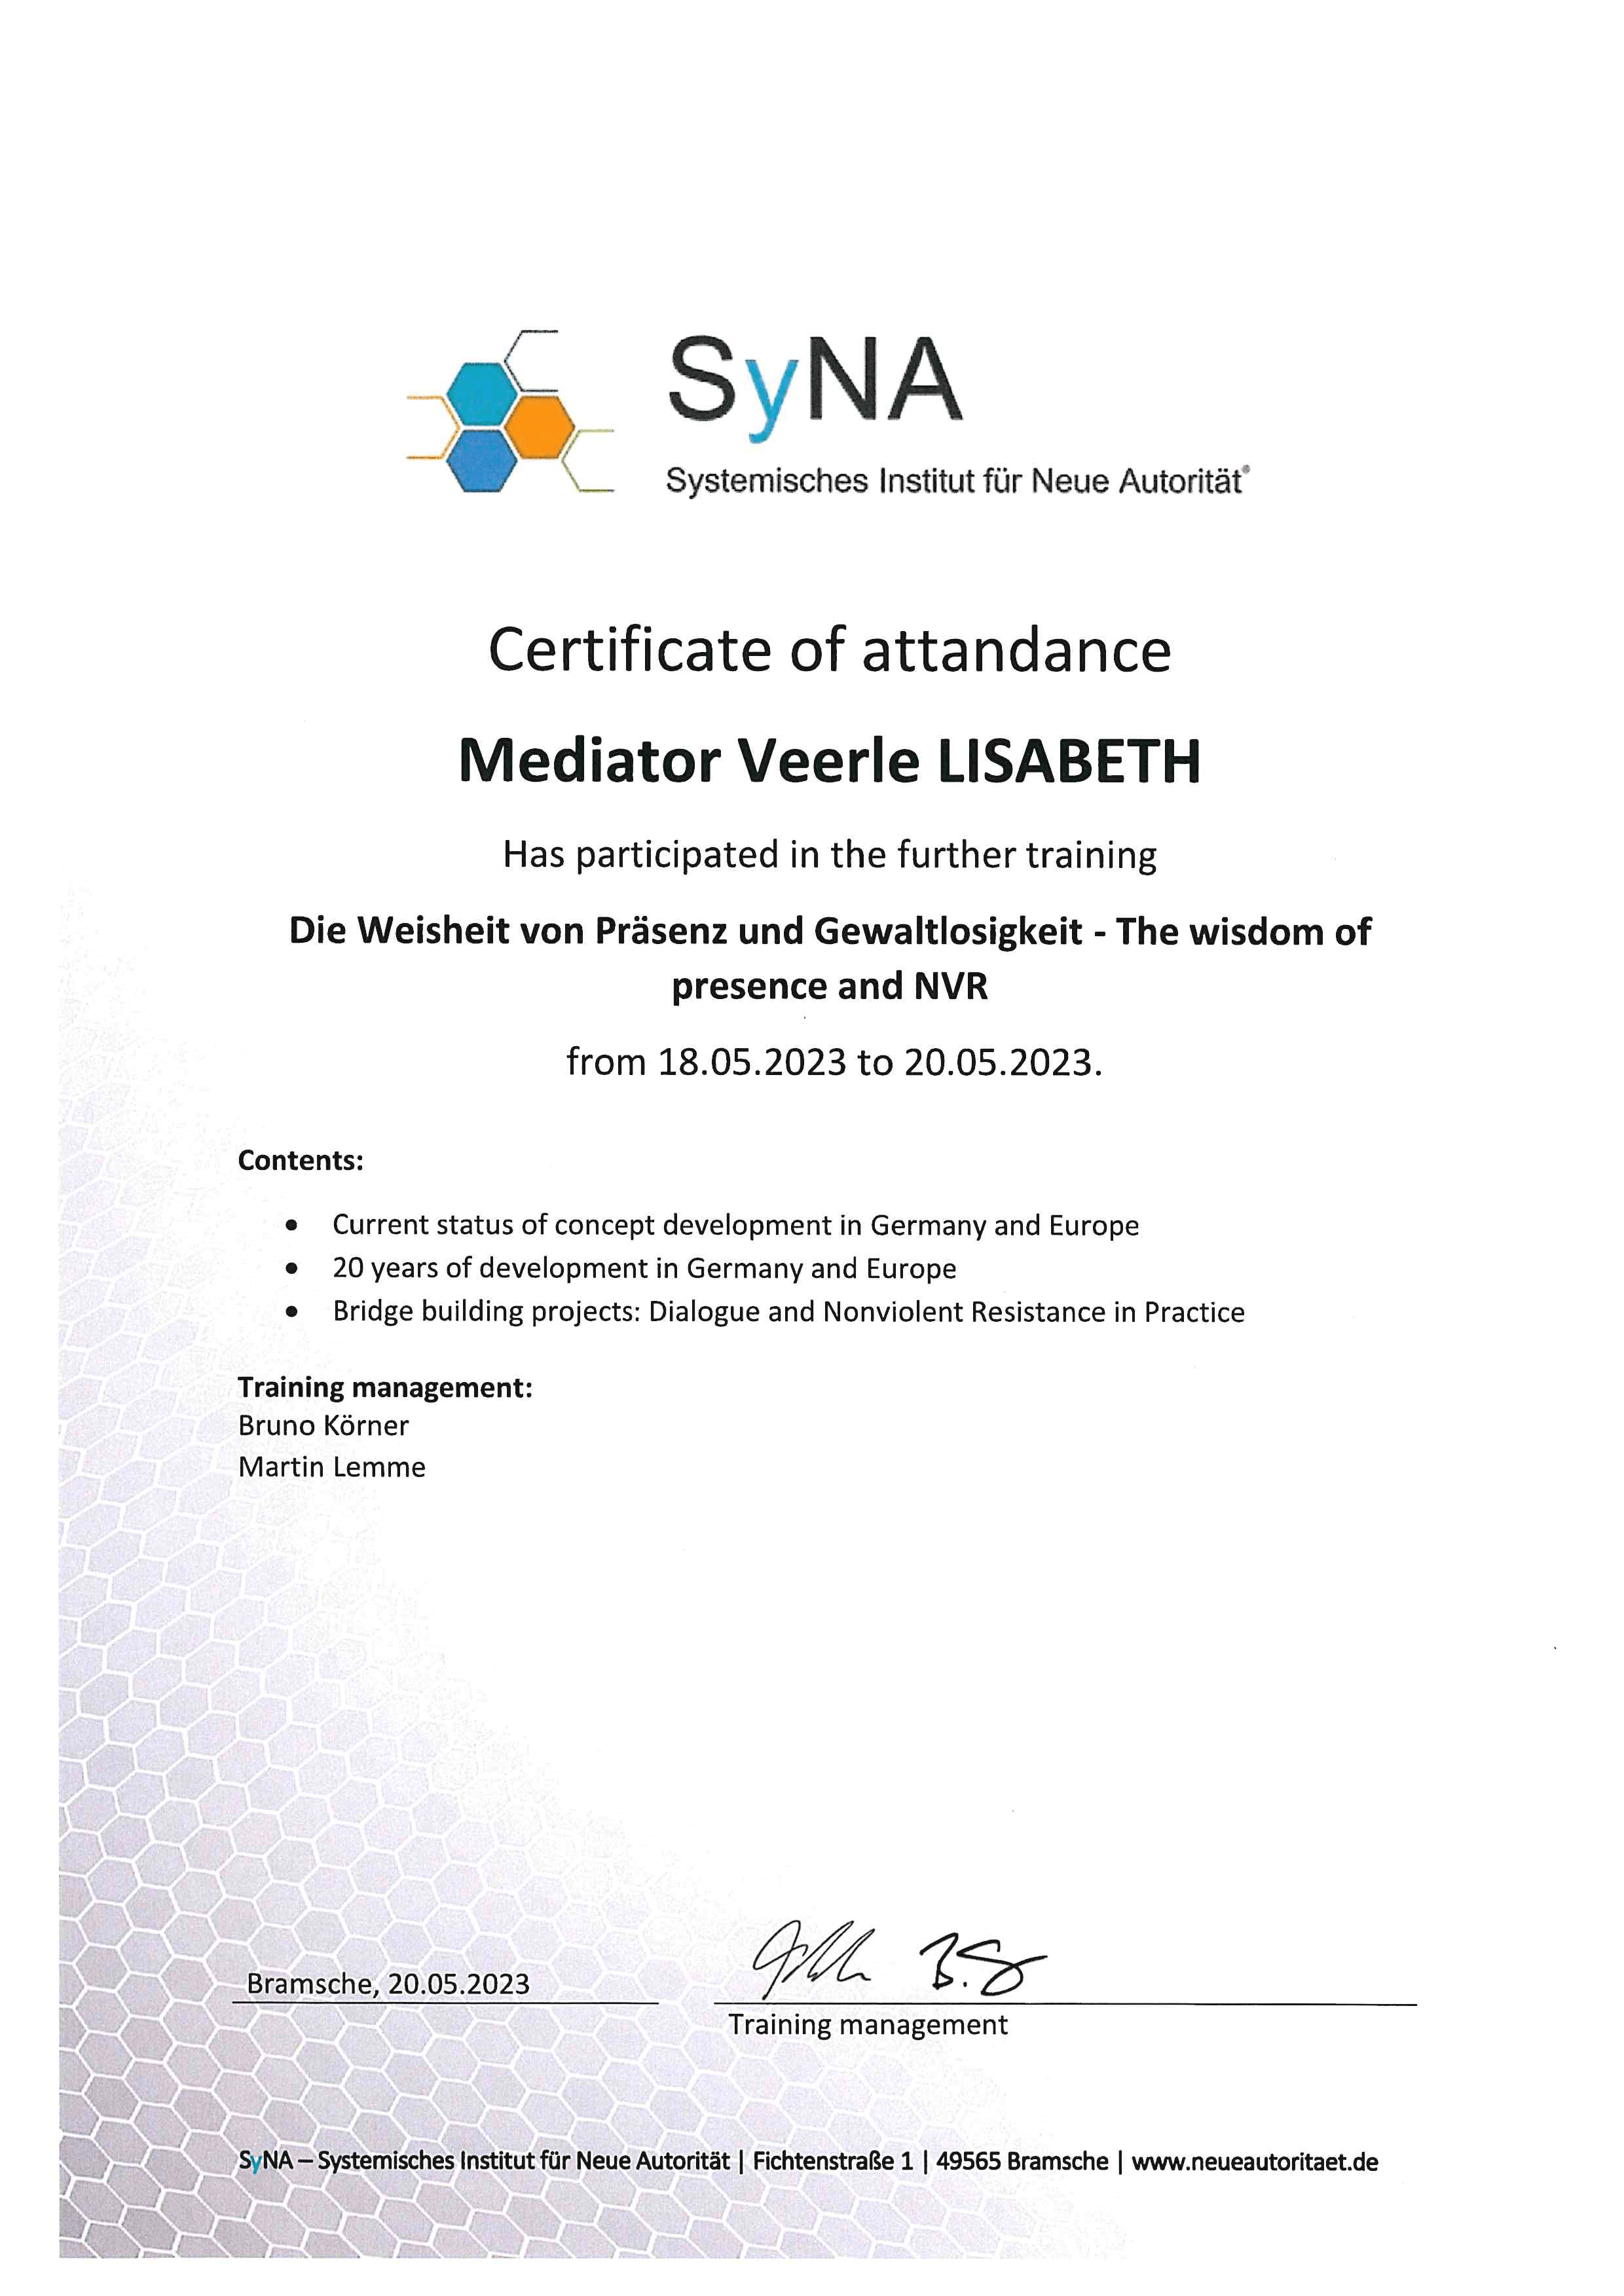 Certificaat - The wisdom of presence and NVR - Veerle Lisabeth